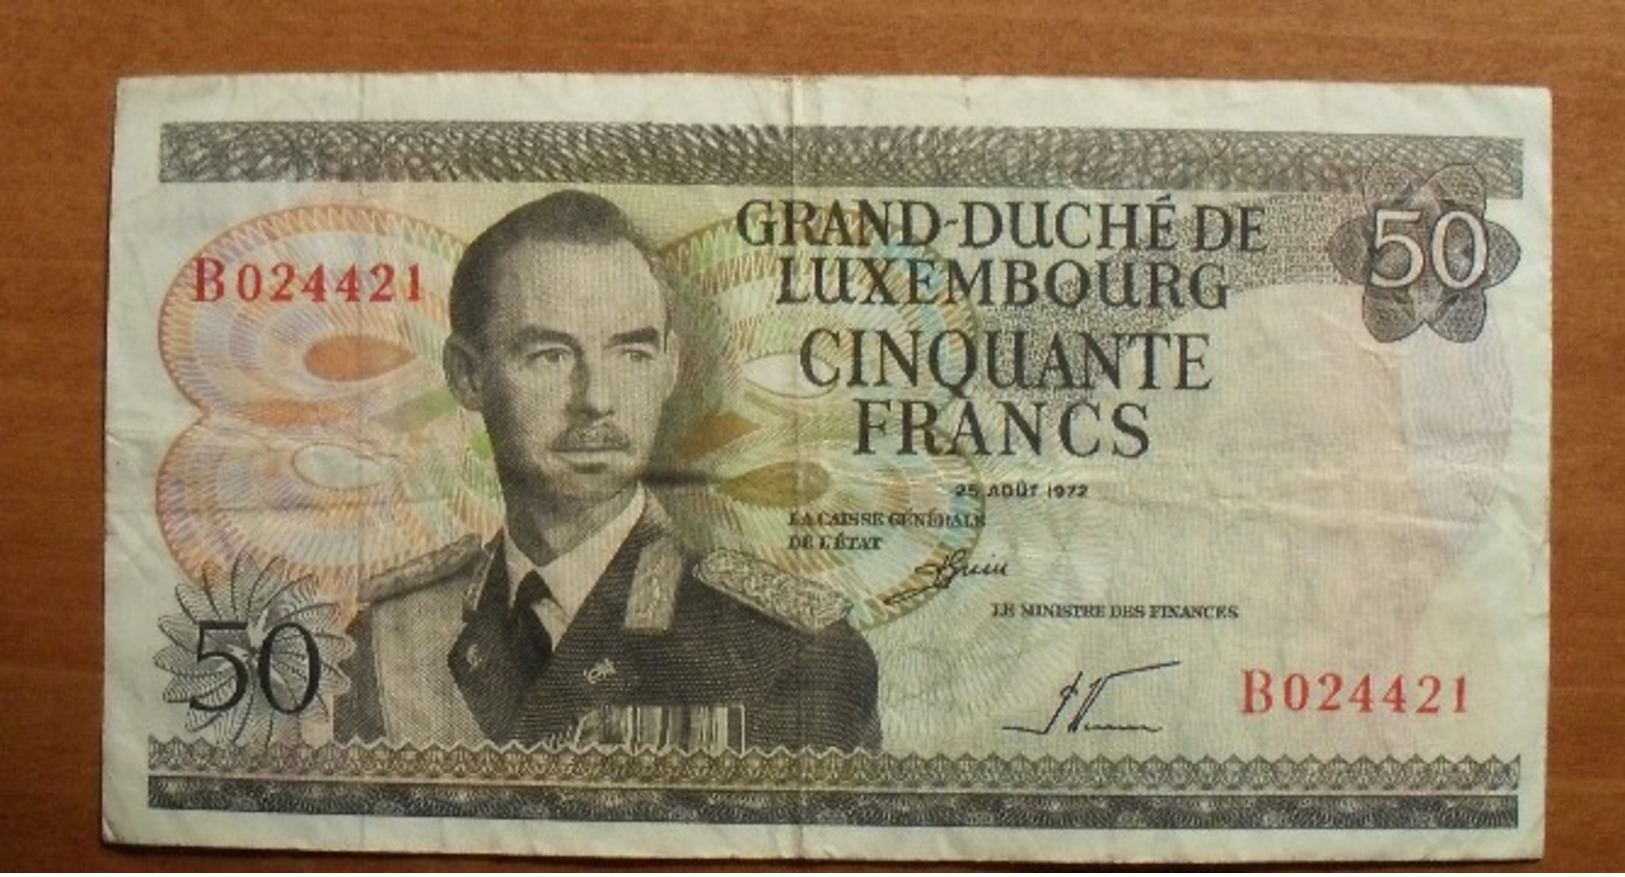 1972 - Luxembourg - 50 CINQUANTE FRANCS, 25 AOUT 1972, B 024421 - Luxemburg